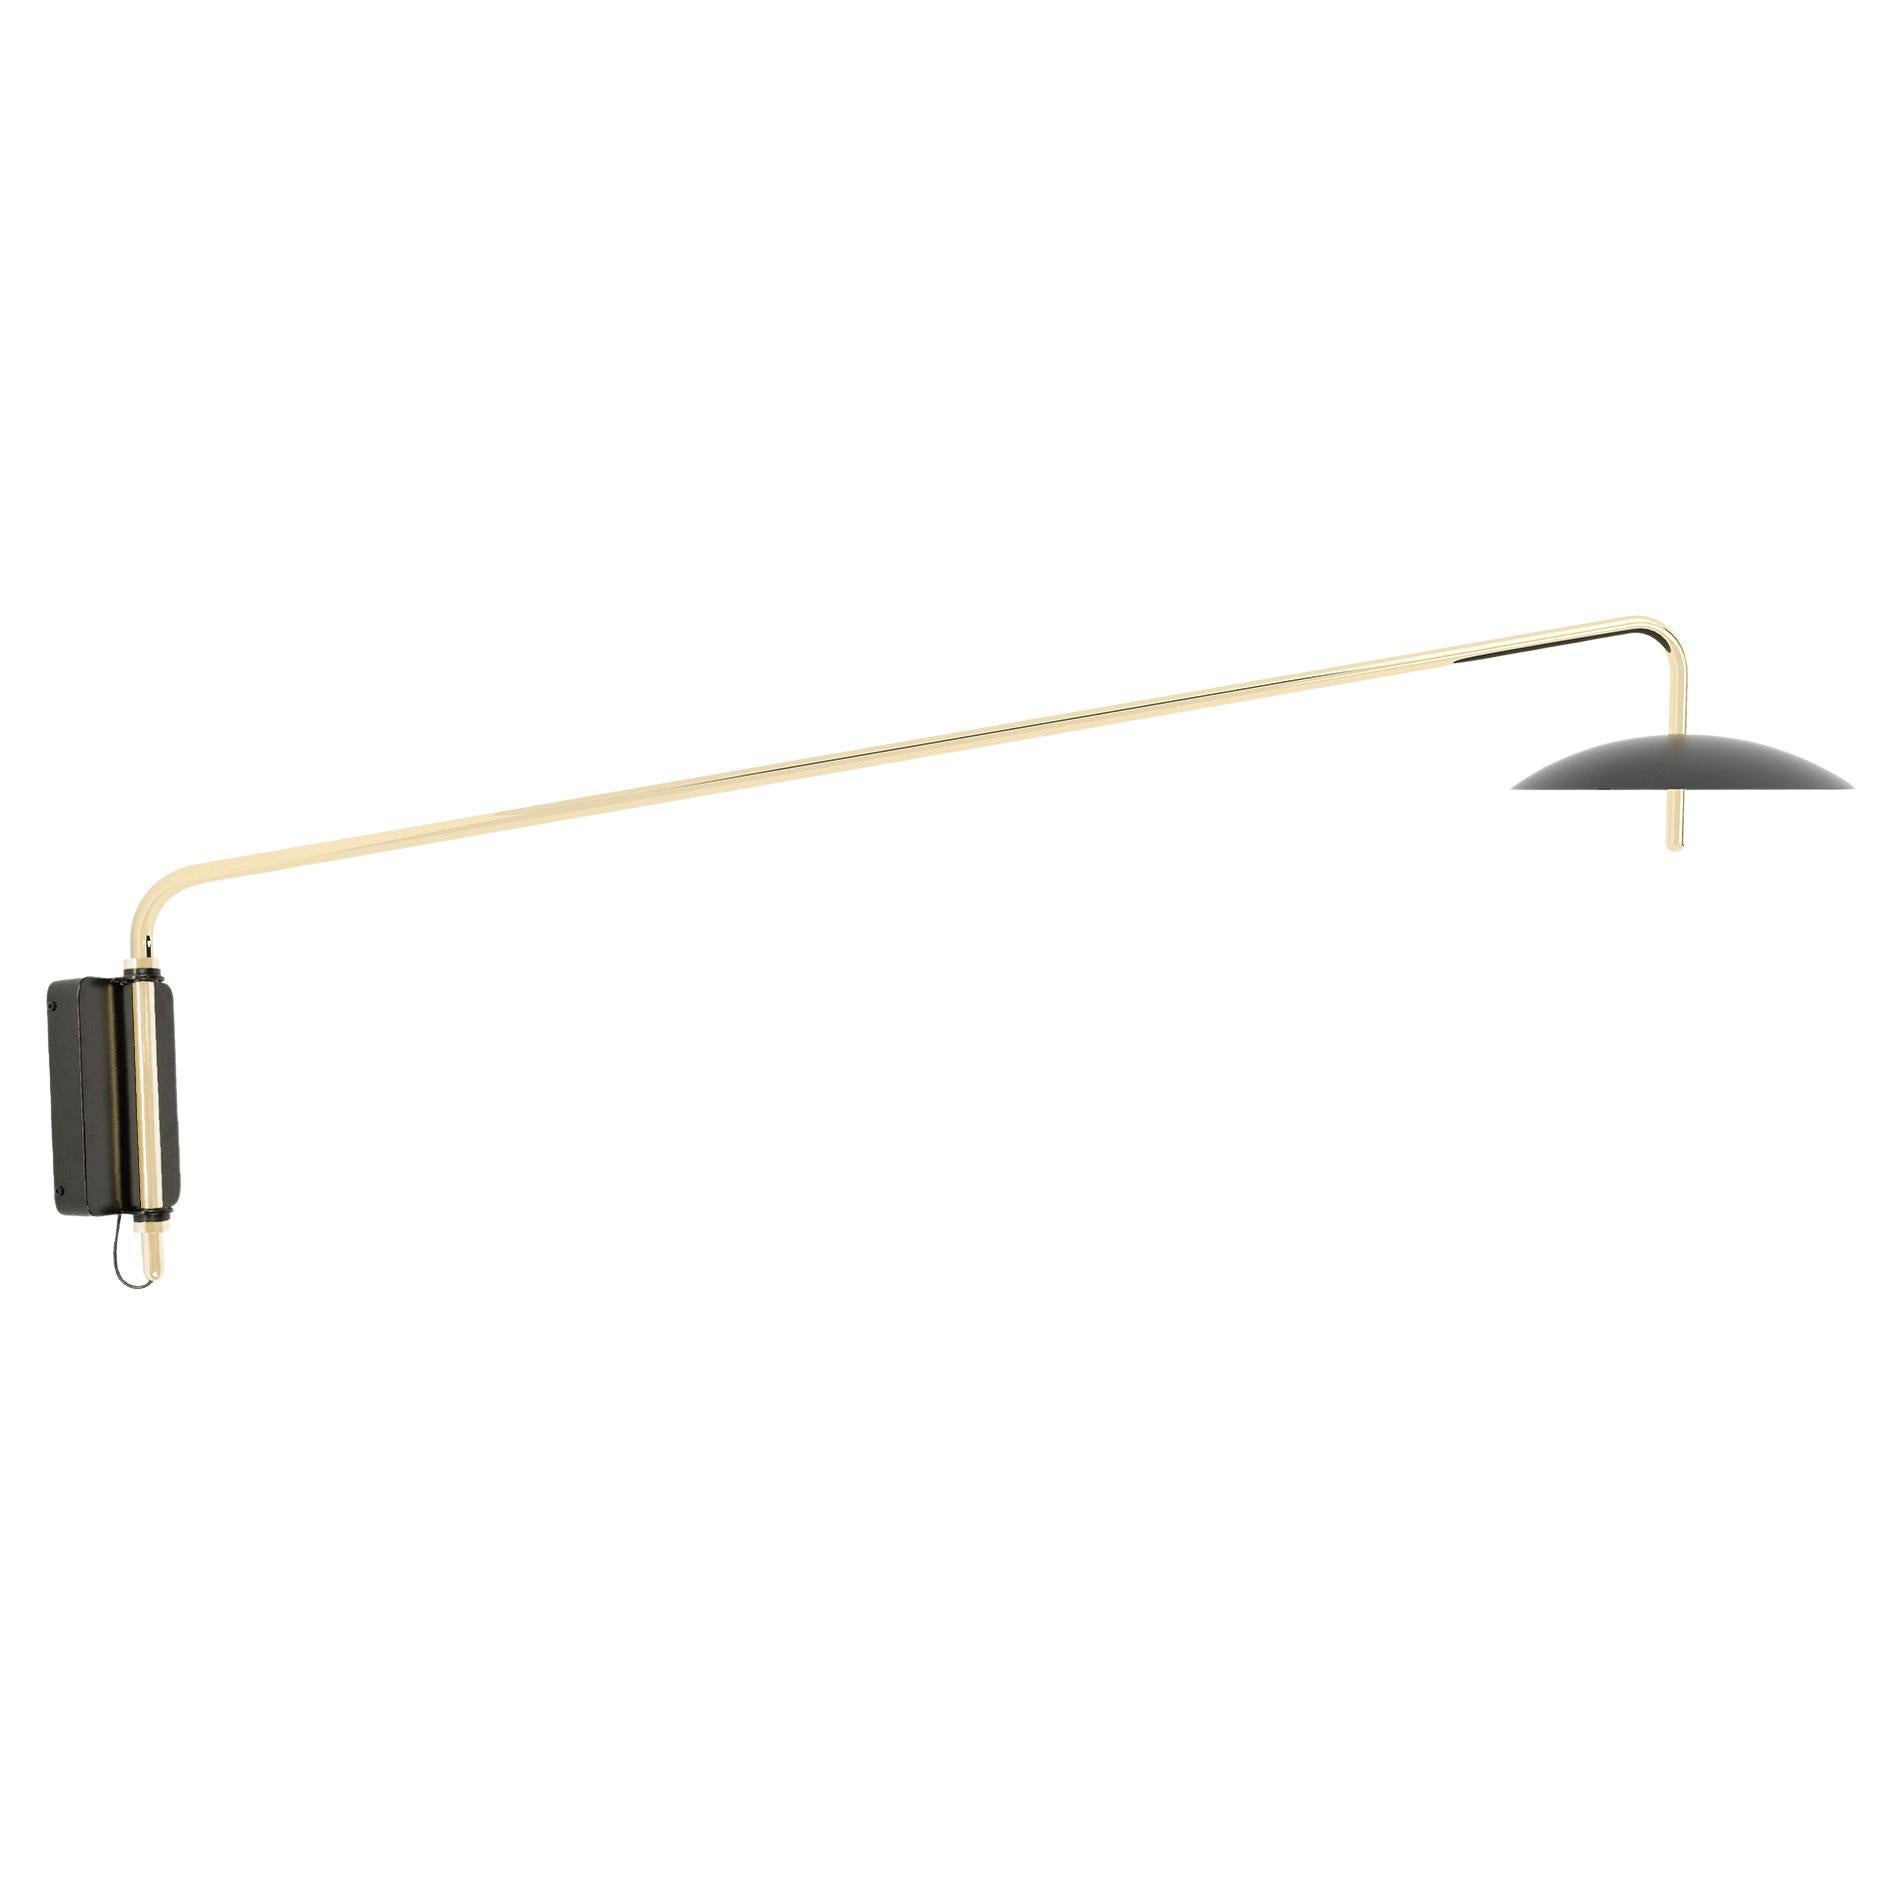 Signal Arm Sconce in Black x Brass, Long, Hardwire, by Souda, Made to Order For Sale